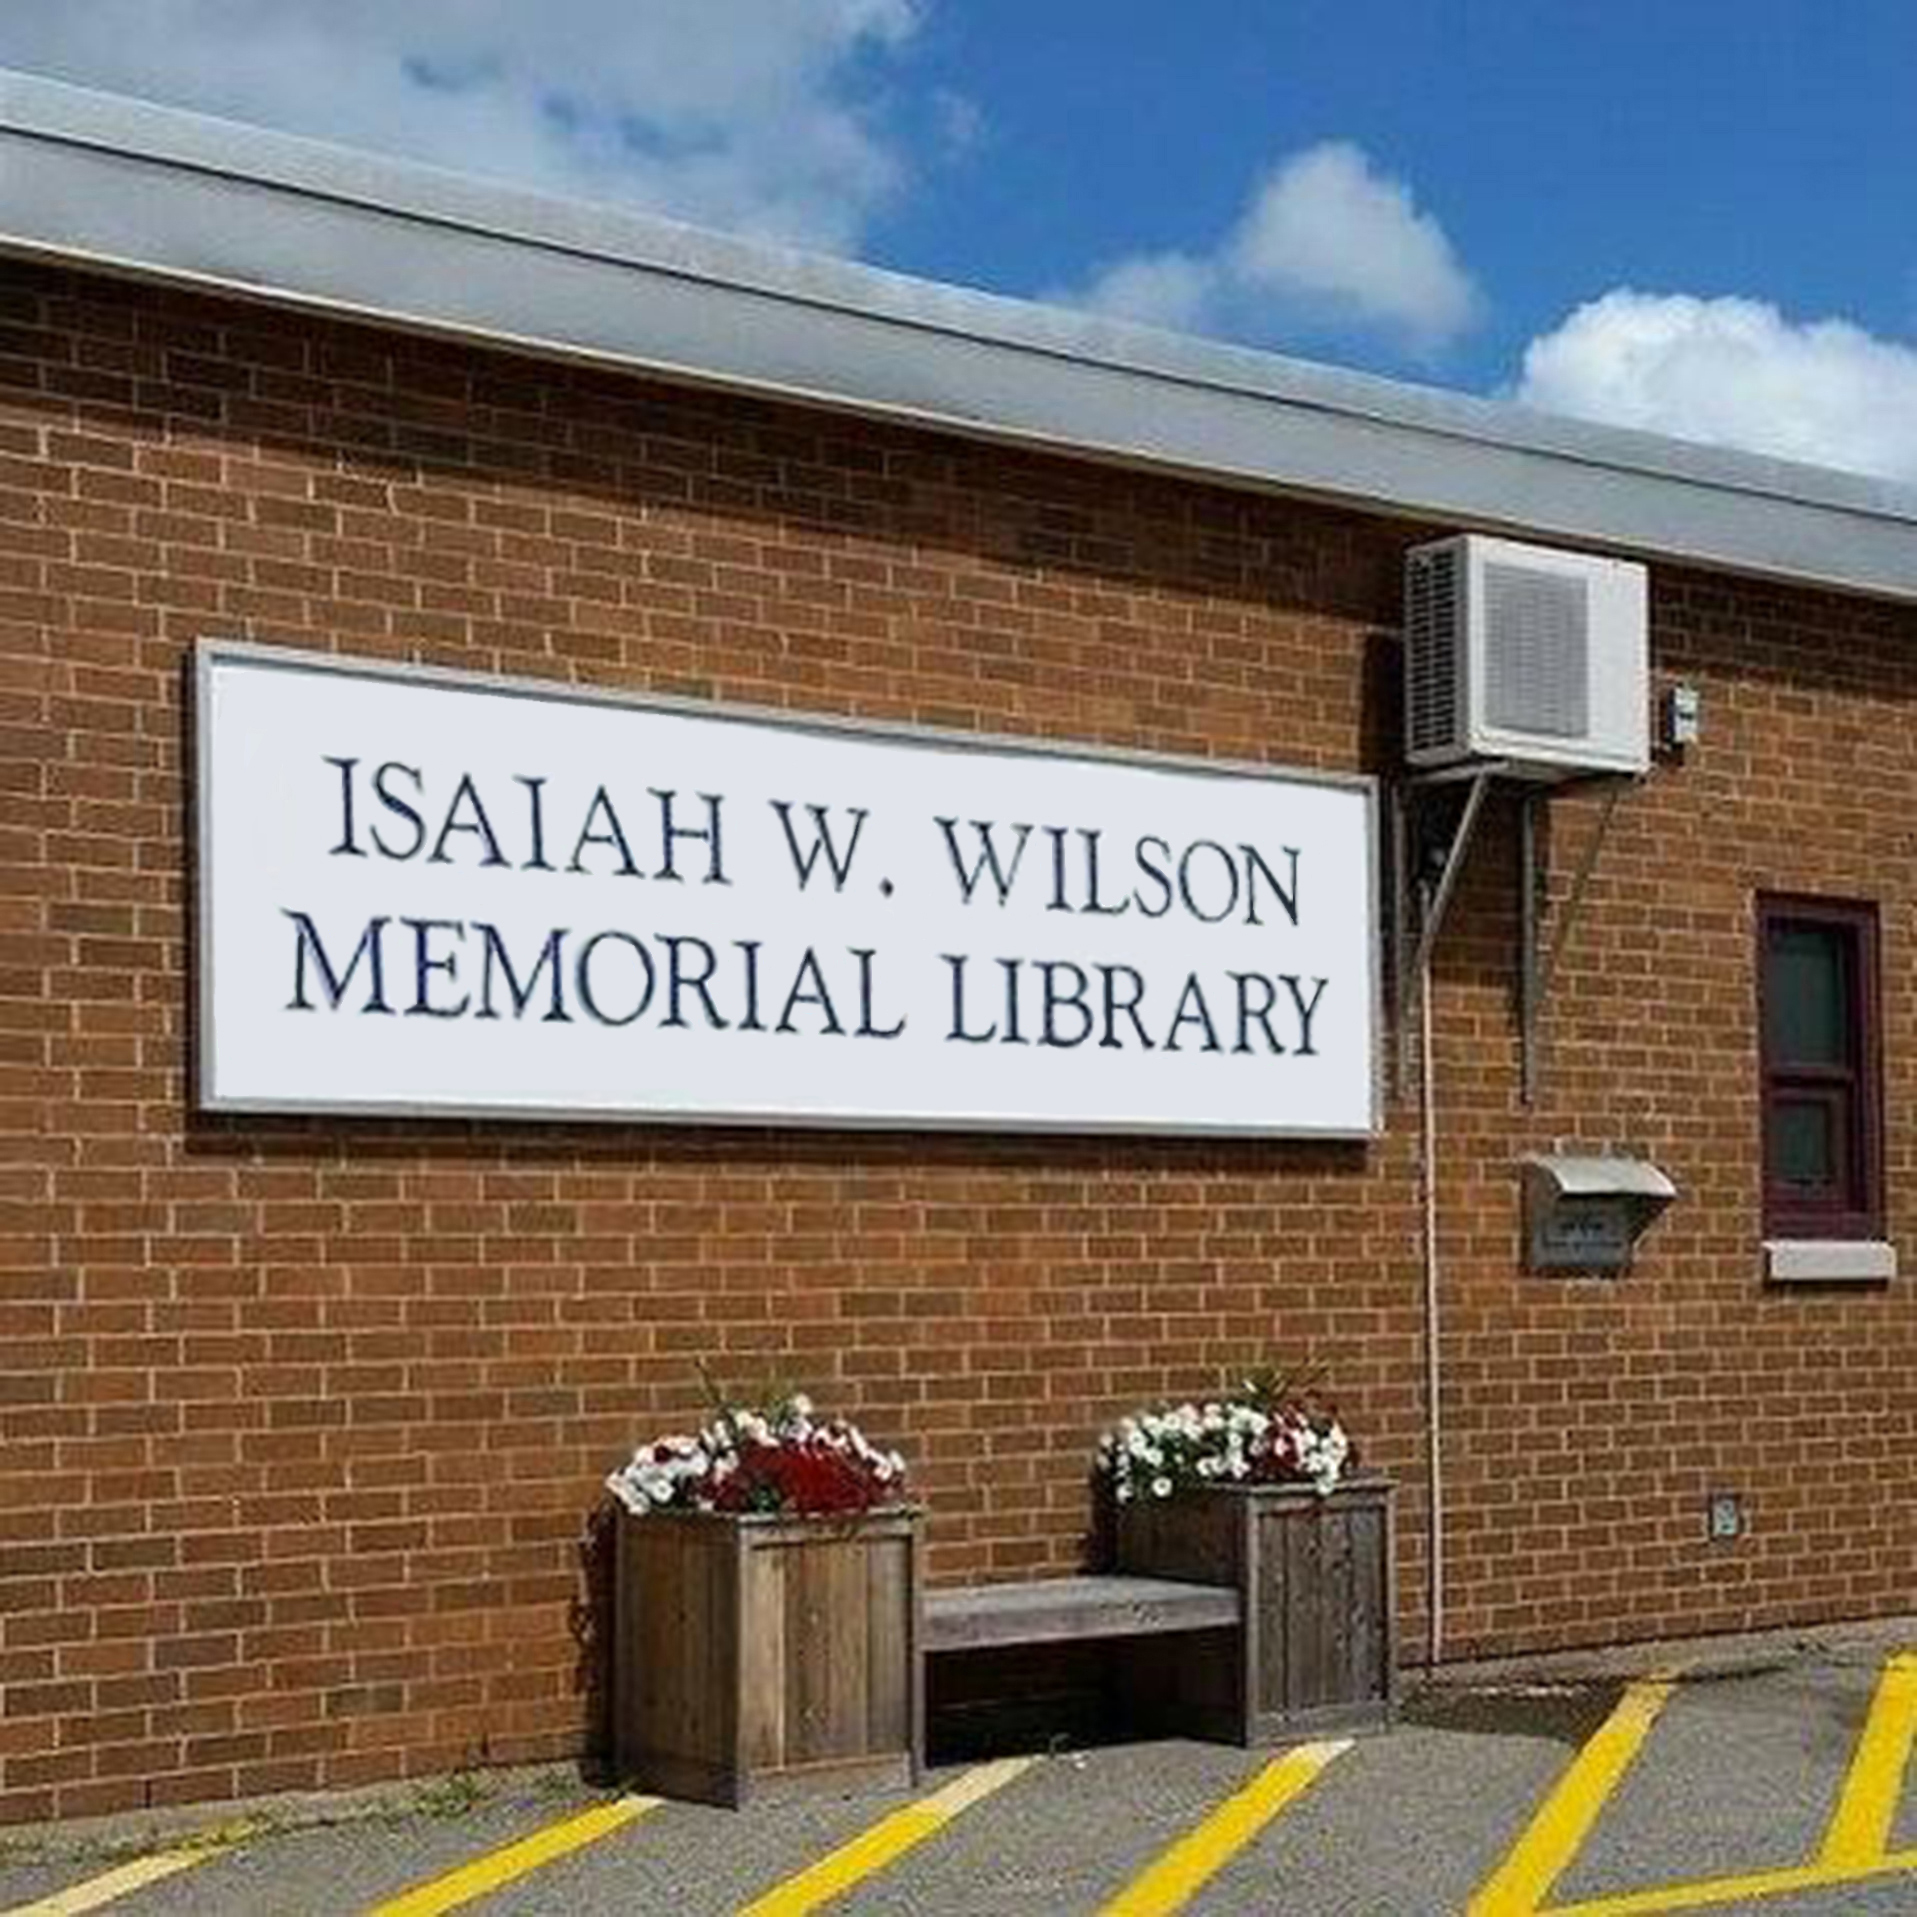 Image of Isaiah W. Wilson Memorial Library in Digby